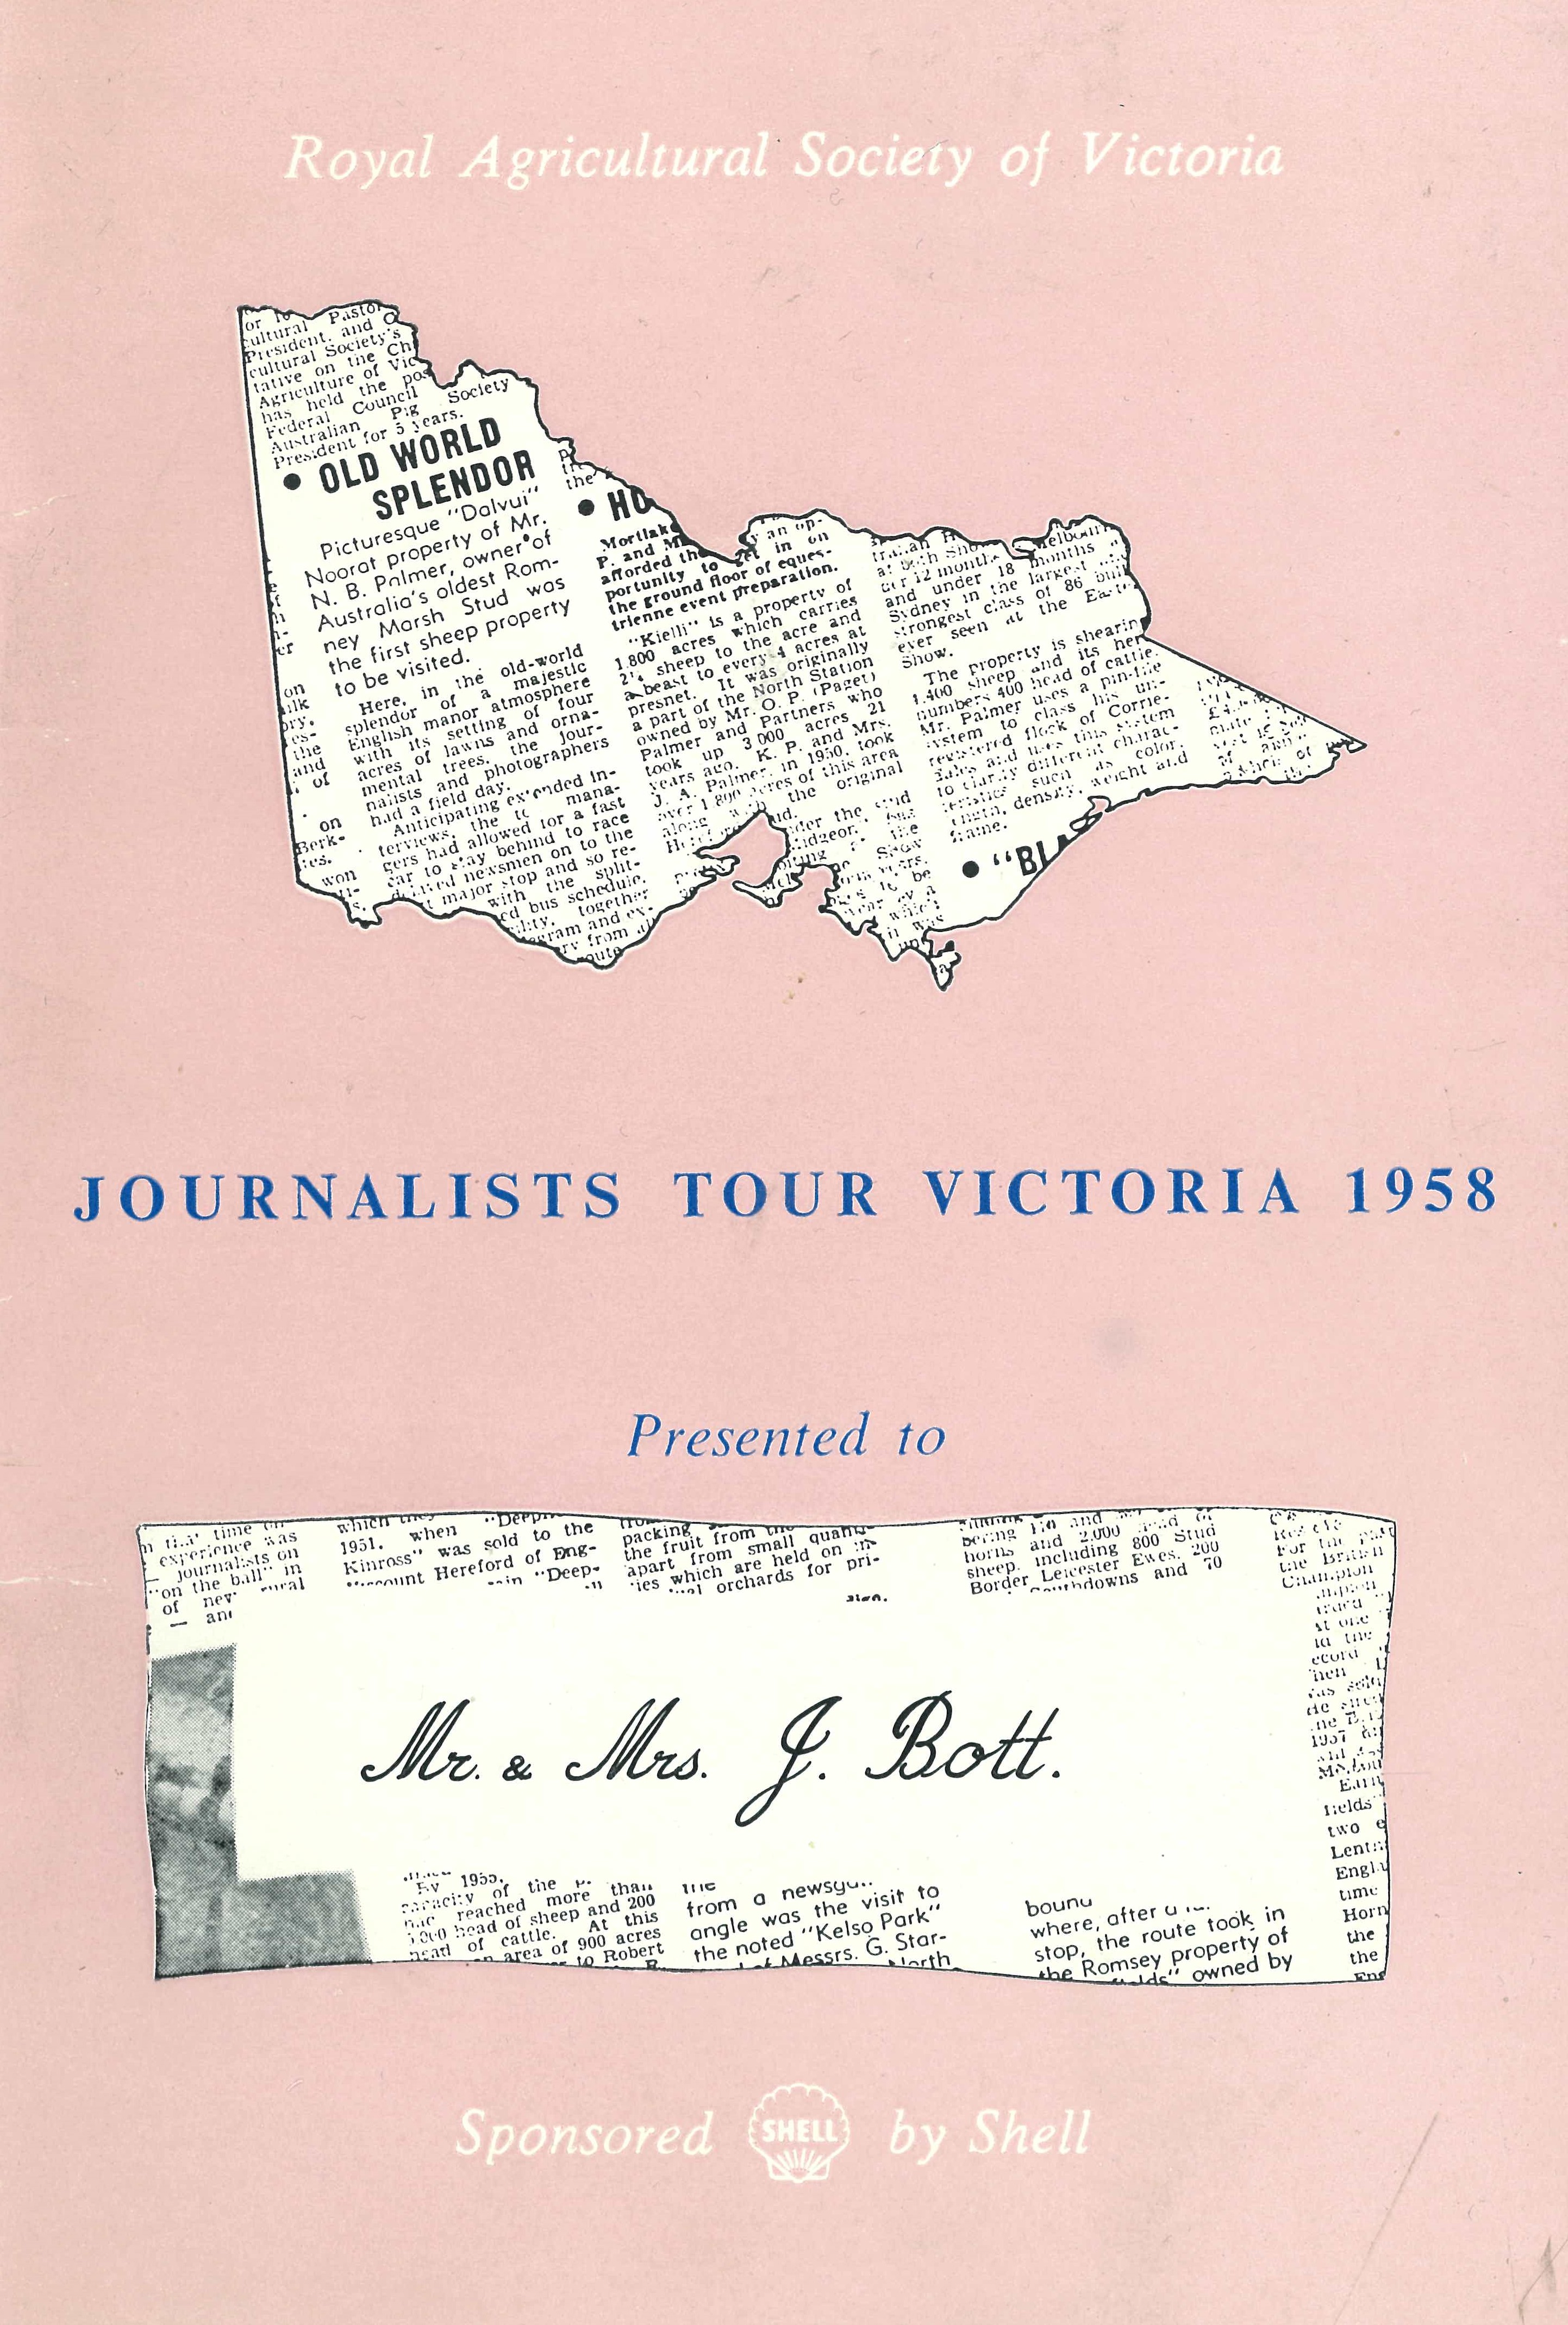 Cover of the summary booklet prepared after the 1958 Shell/RASV Journalists' Tour. Source: Melbourne Royal Heritage Collection.